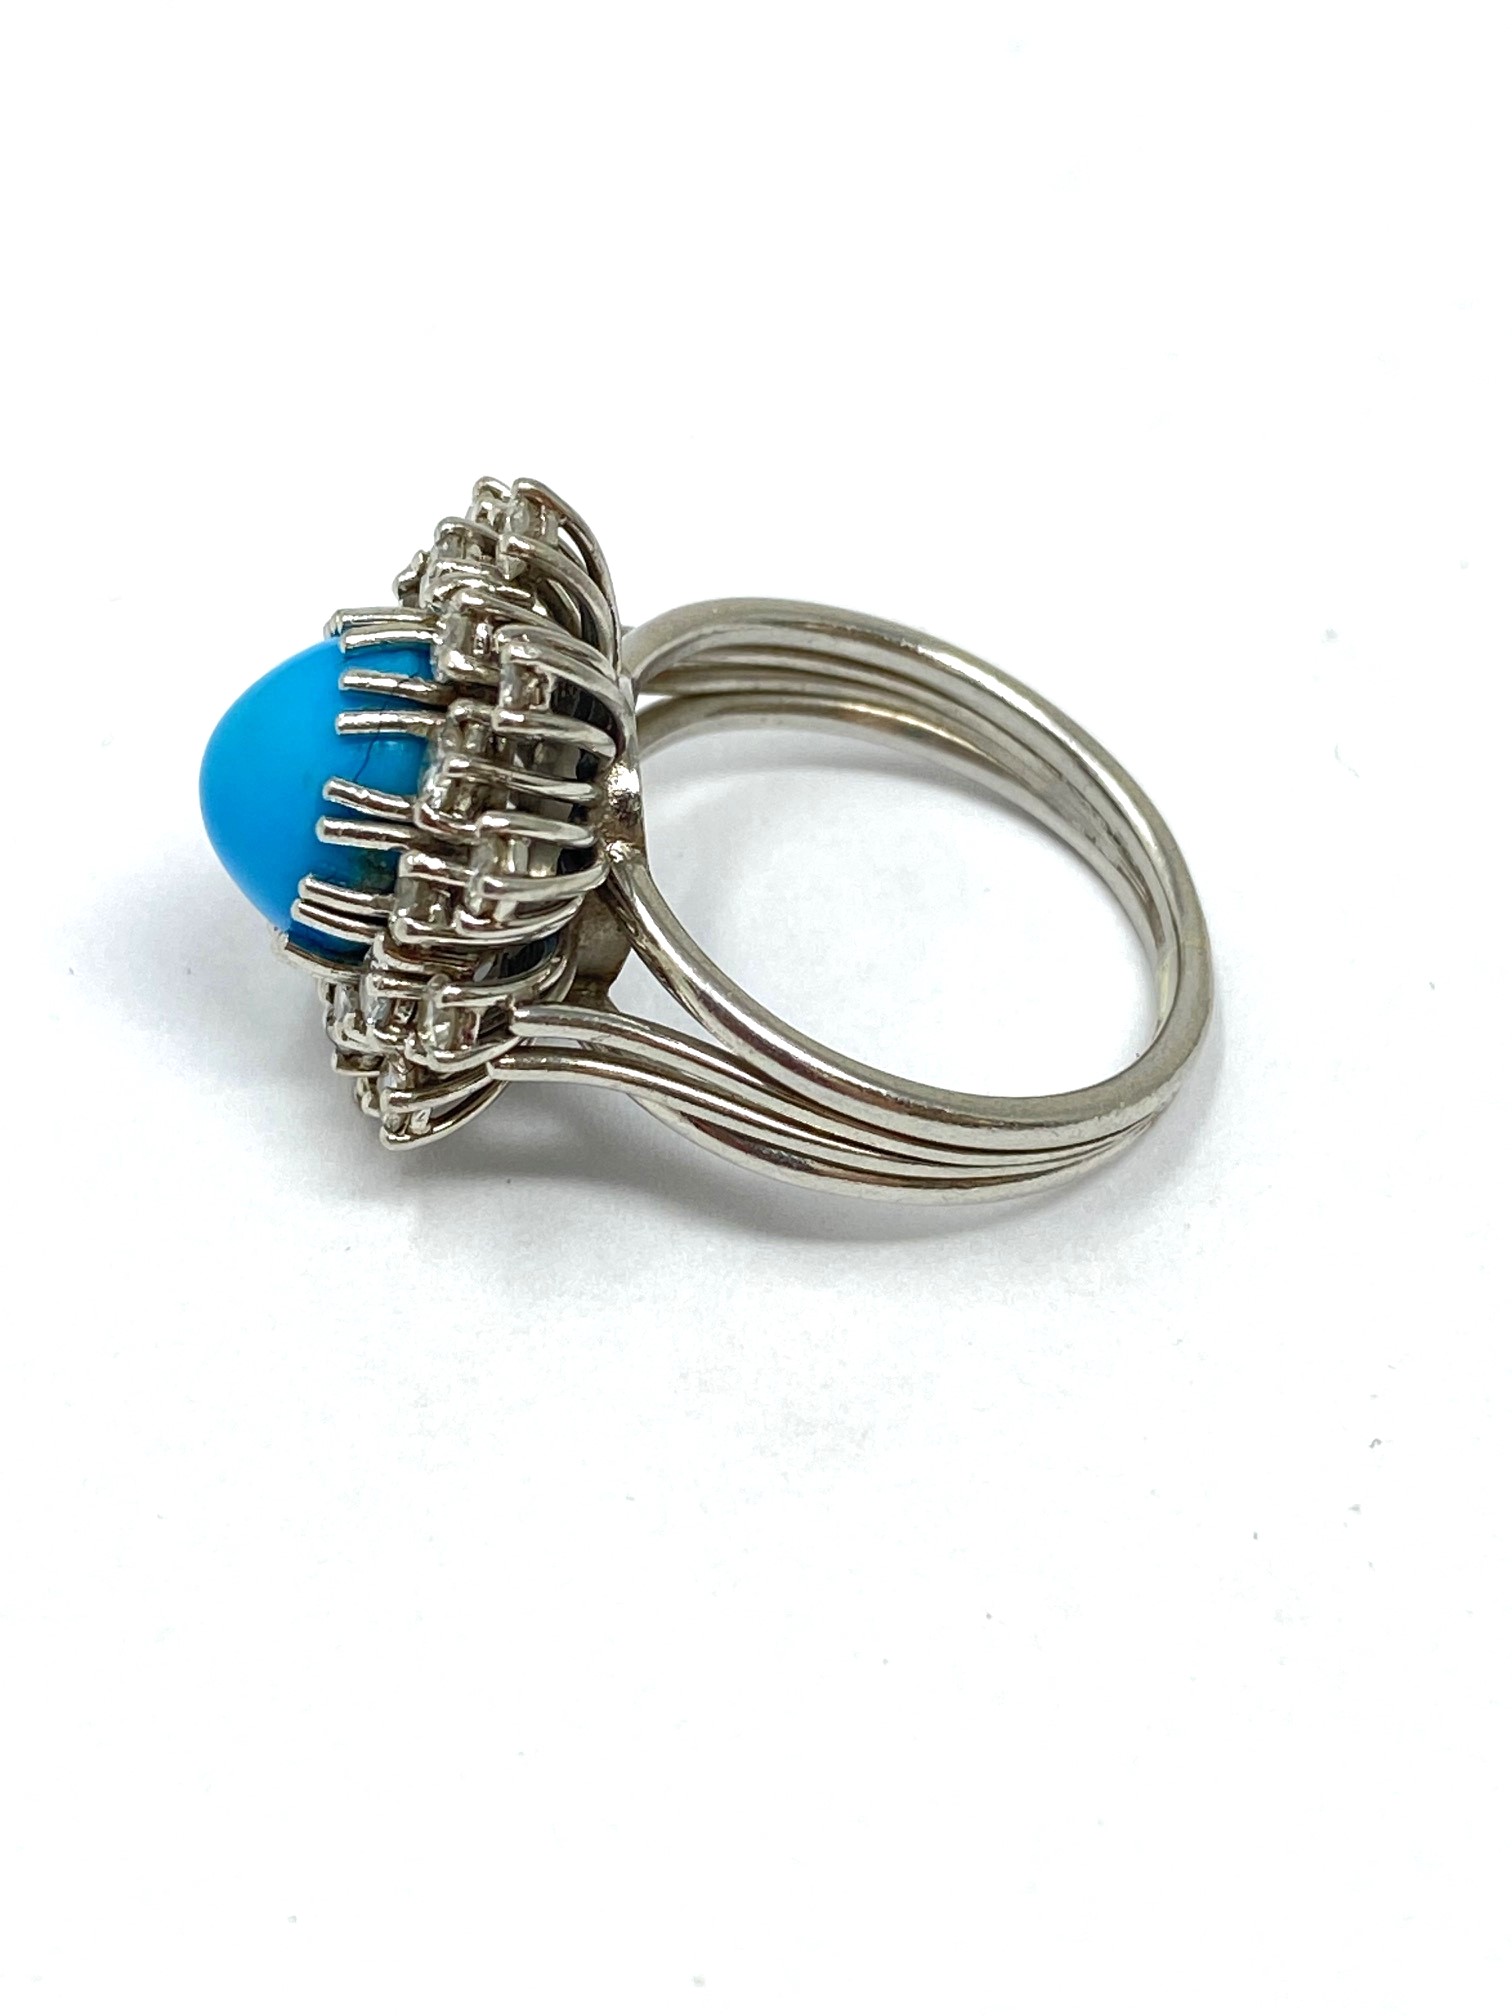 TURQUOISE AND DIAMOND RING, 1960s - Image 3 of 7